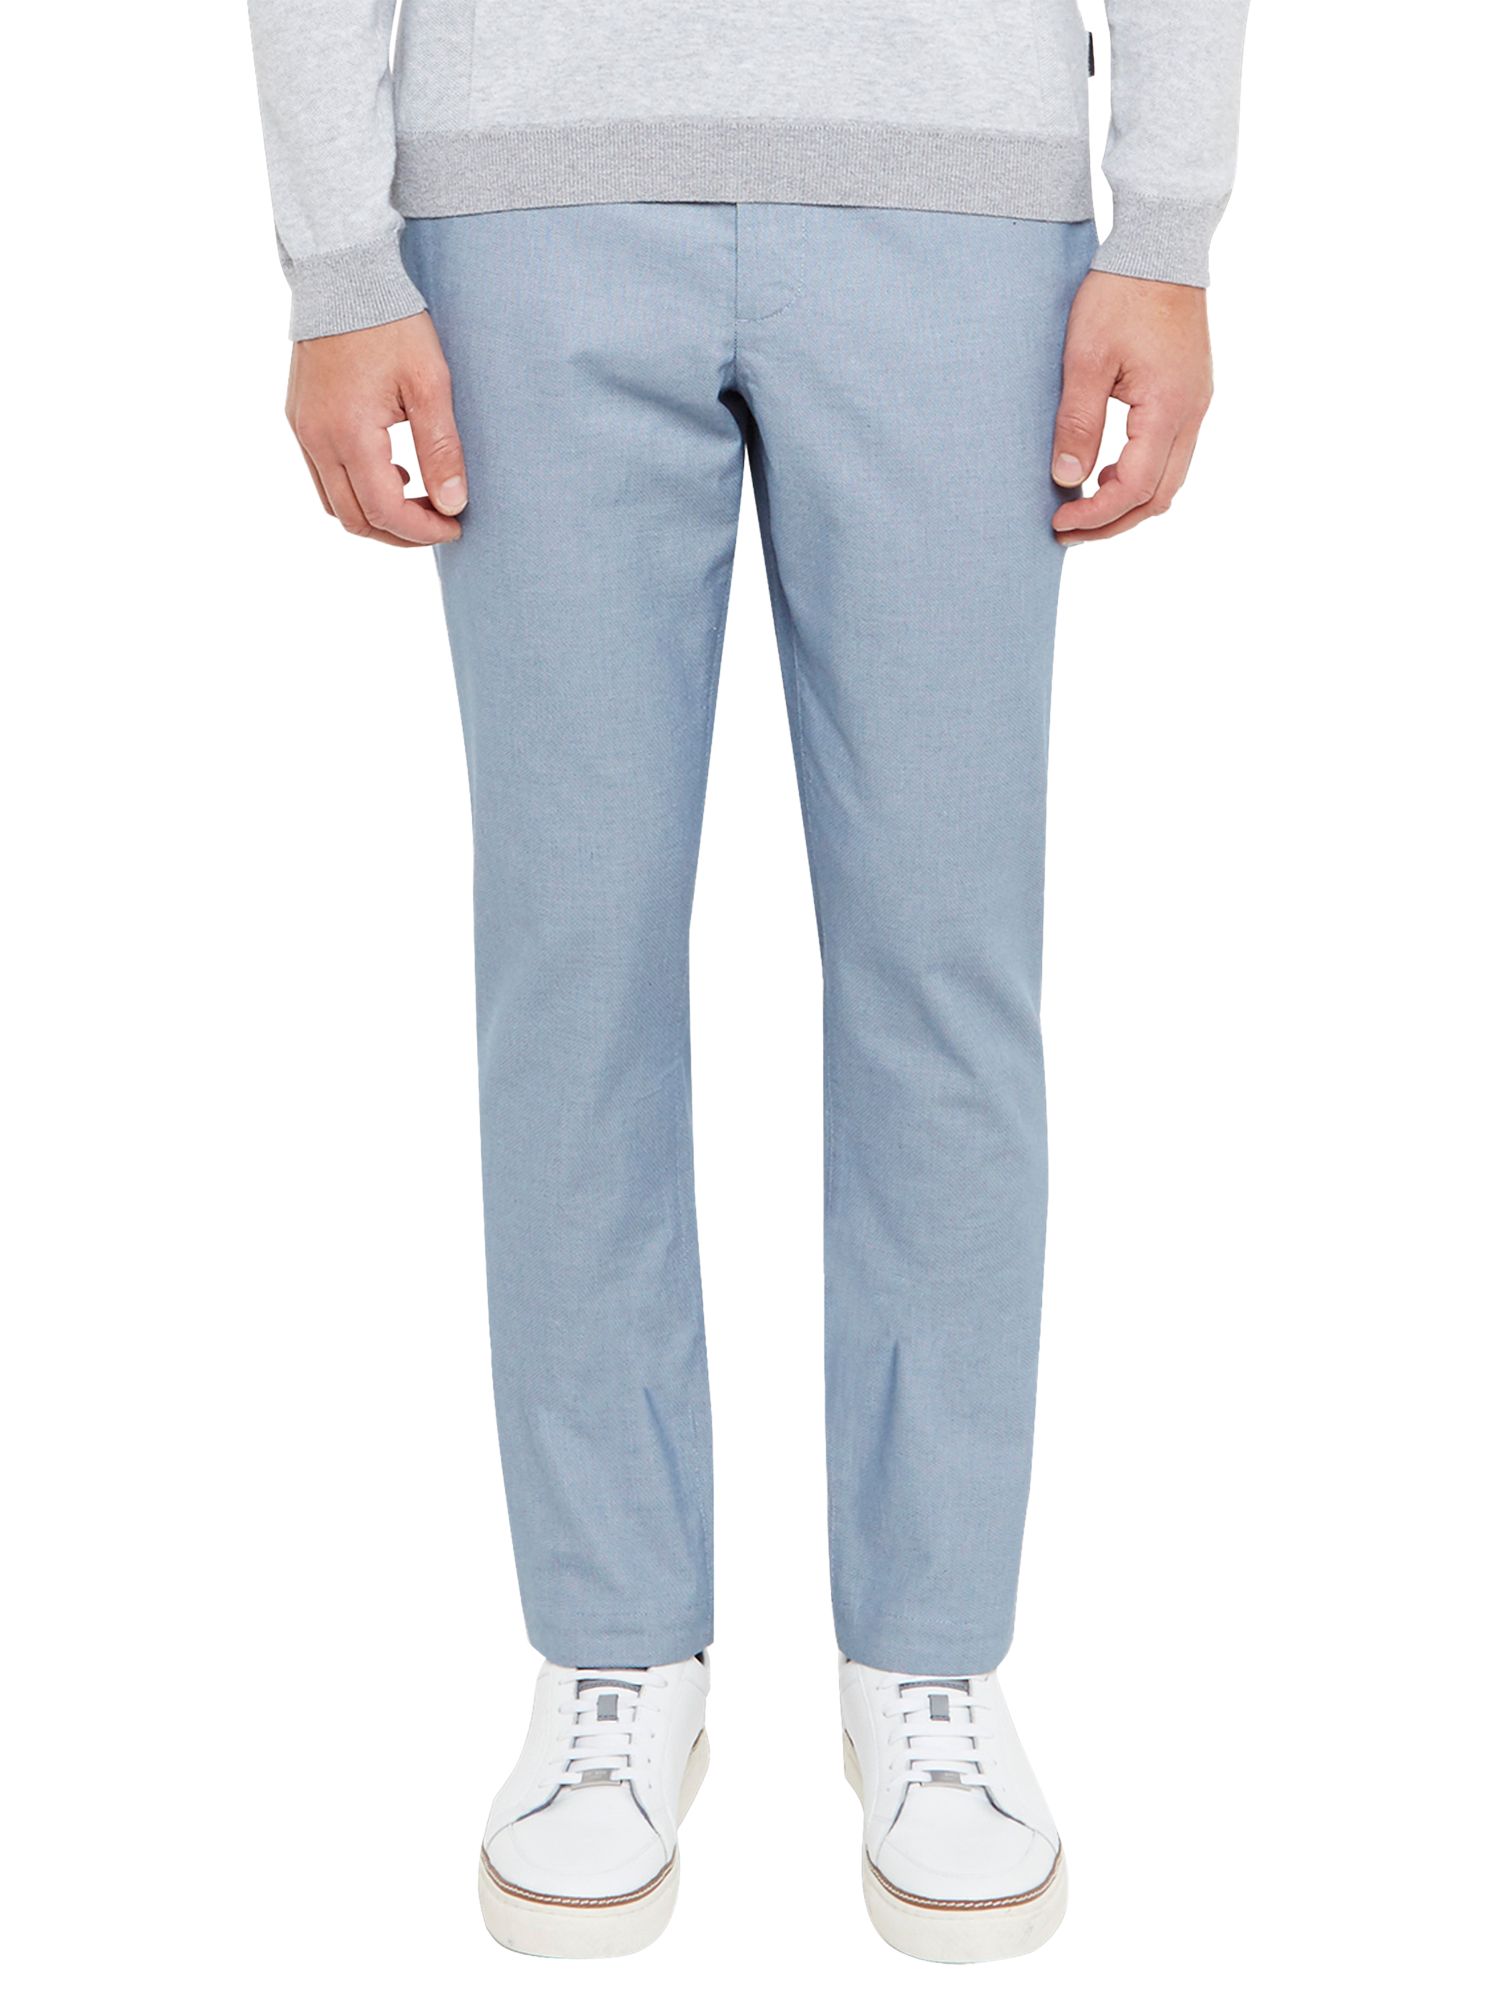 Ted Baker Clasmor Oxford Stretch Cotton Chinos, Light Blue, 36S